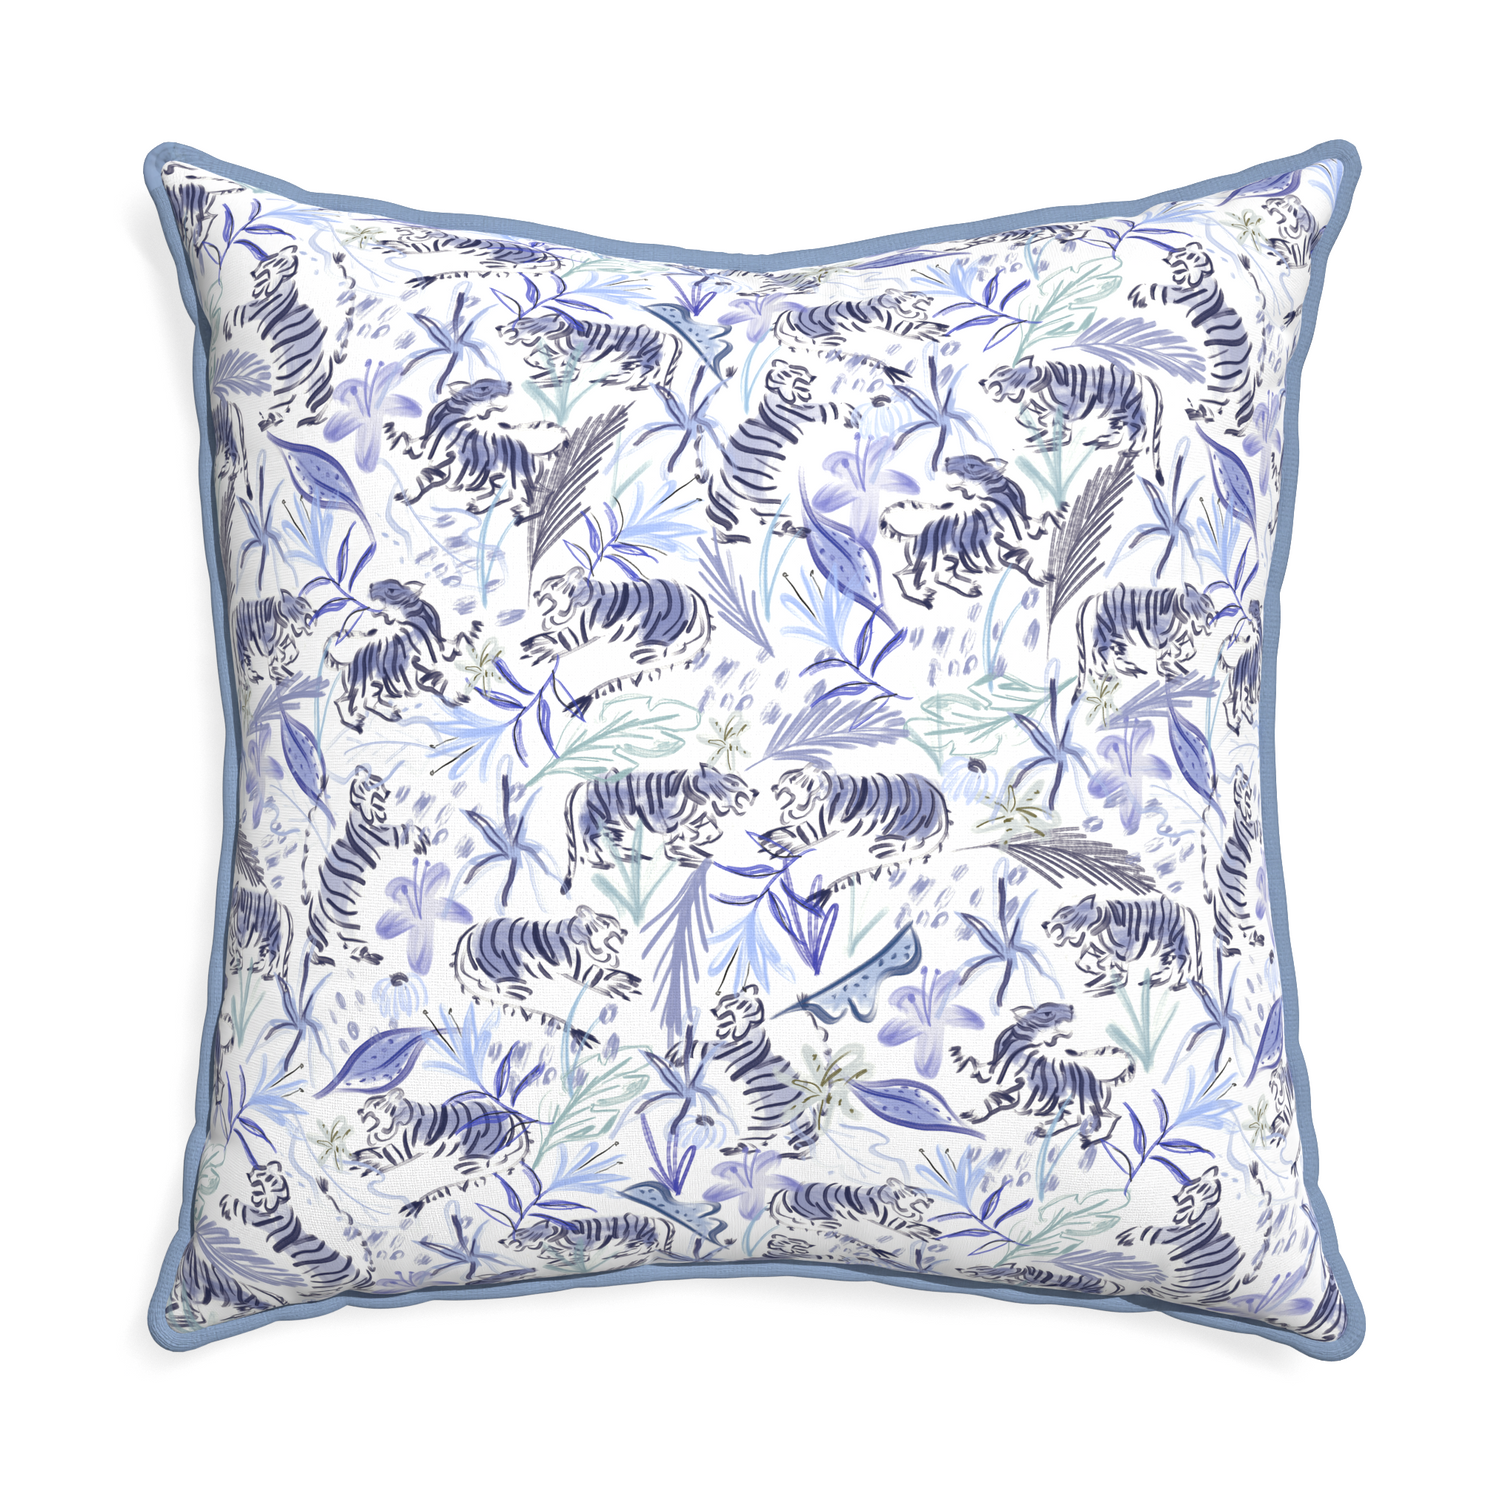 Euro-sham frida blue custom blue with intricate tiger designpillow with sky piping on white background